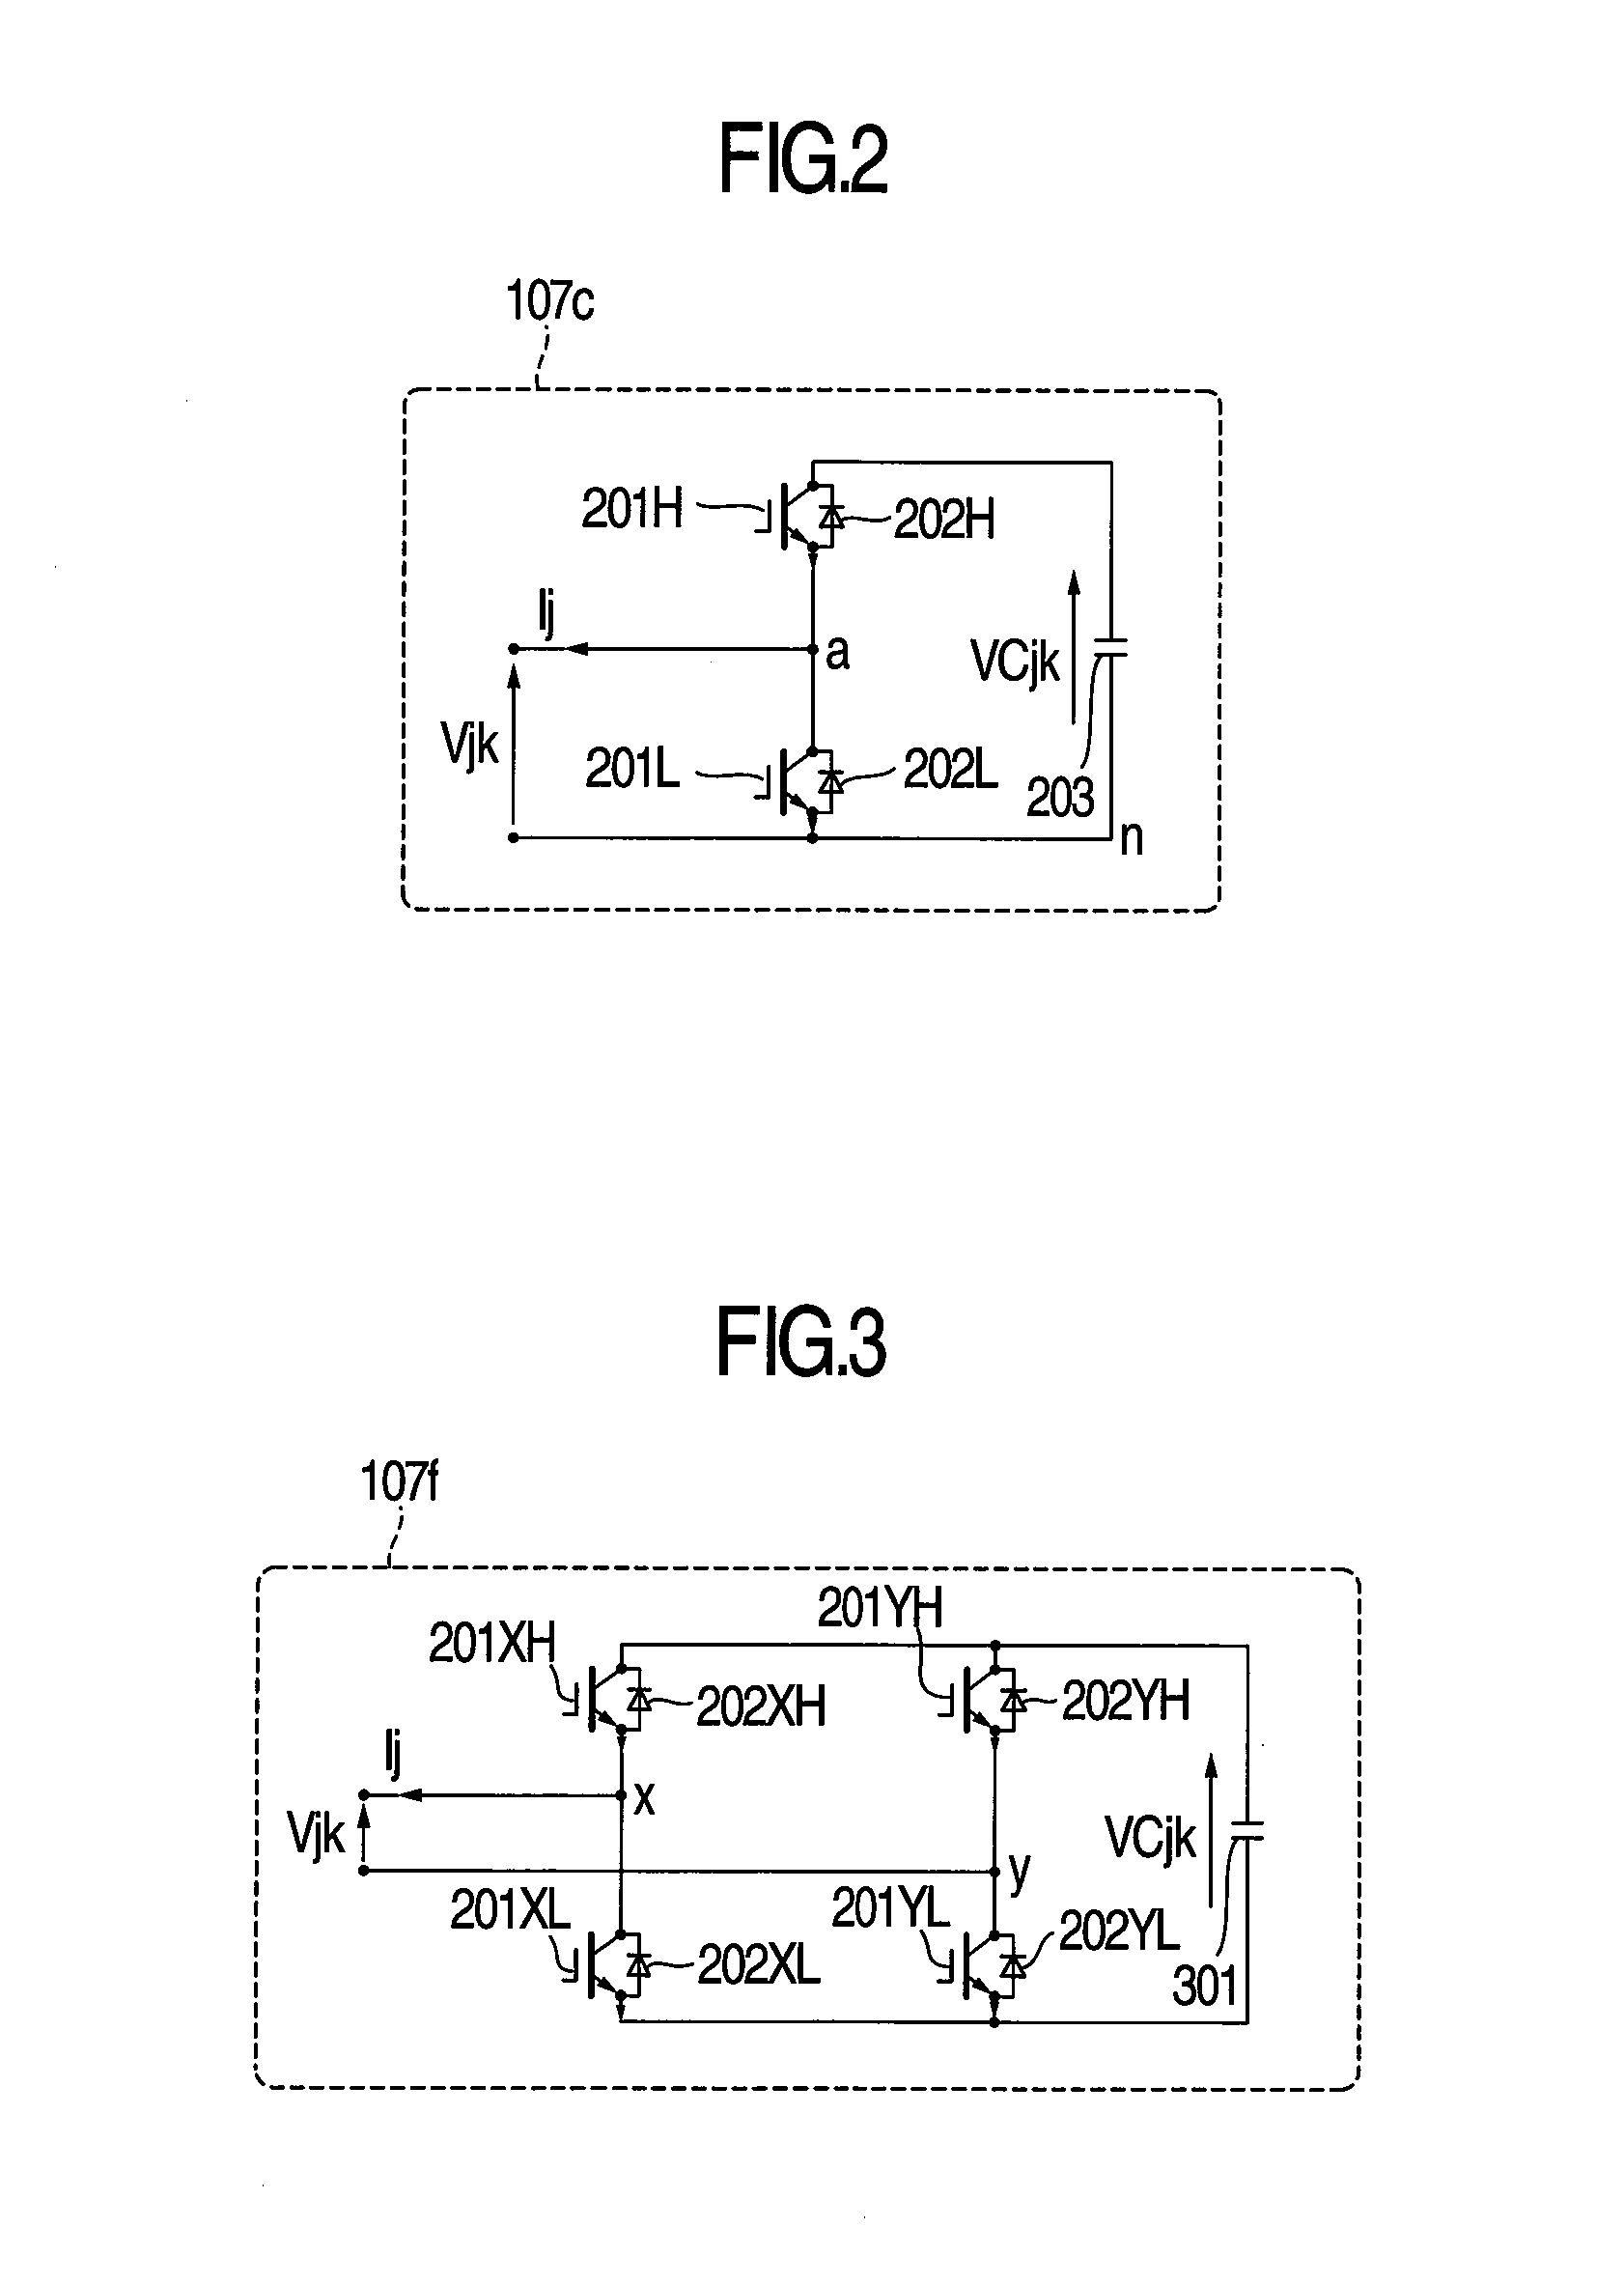 Power conversion apparatus and high-voltage DC transmission system